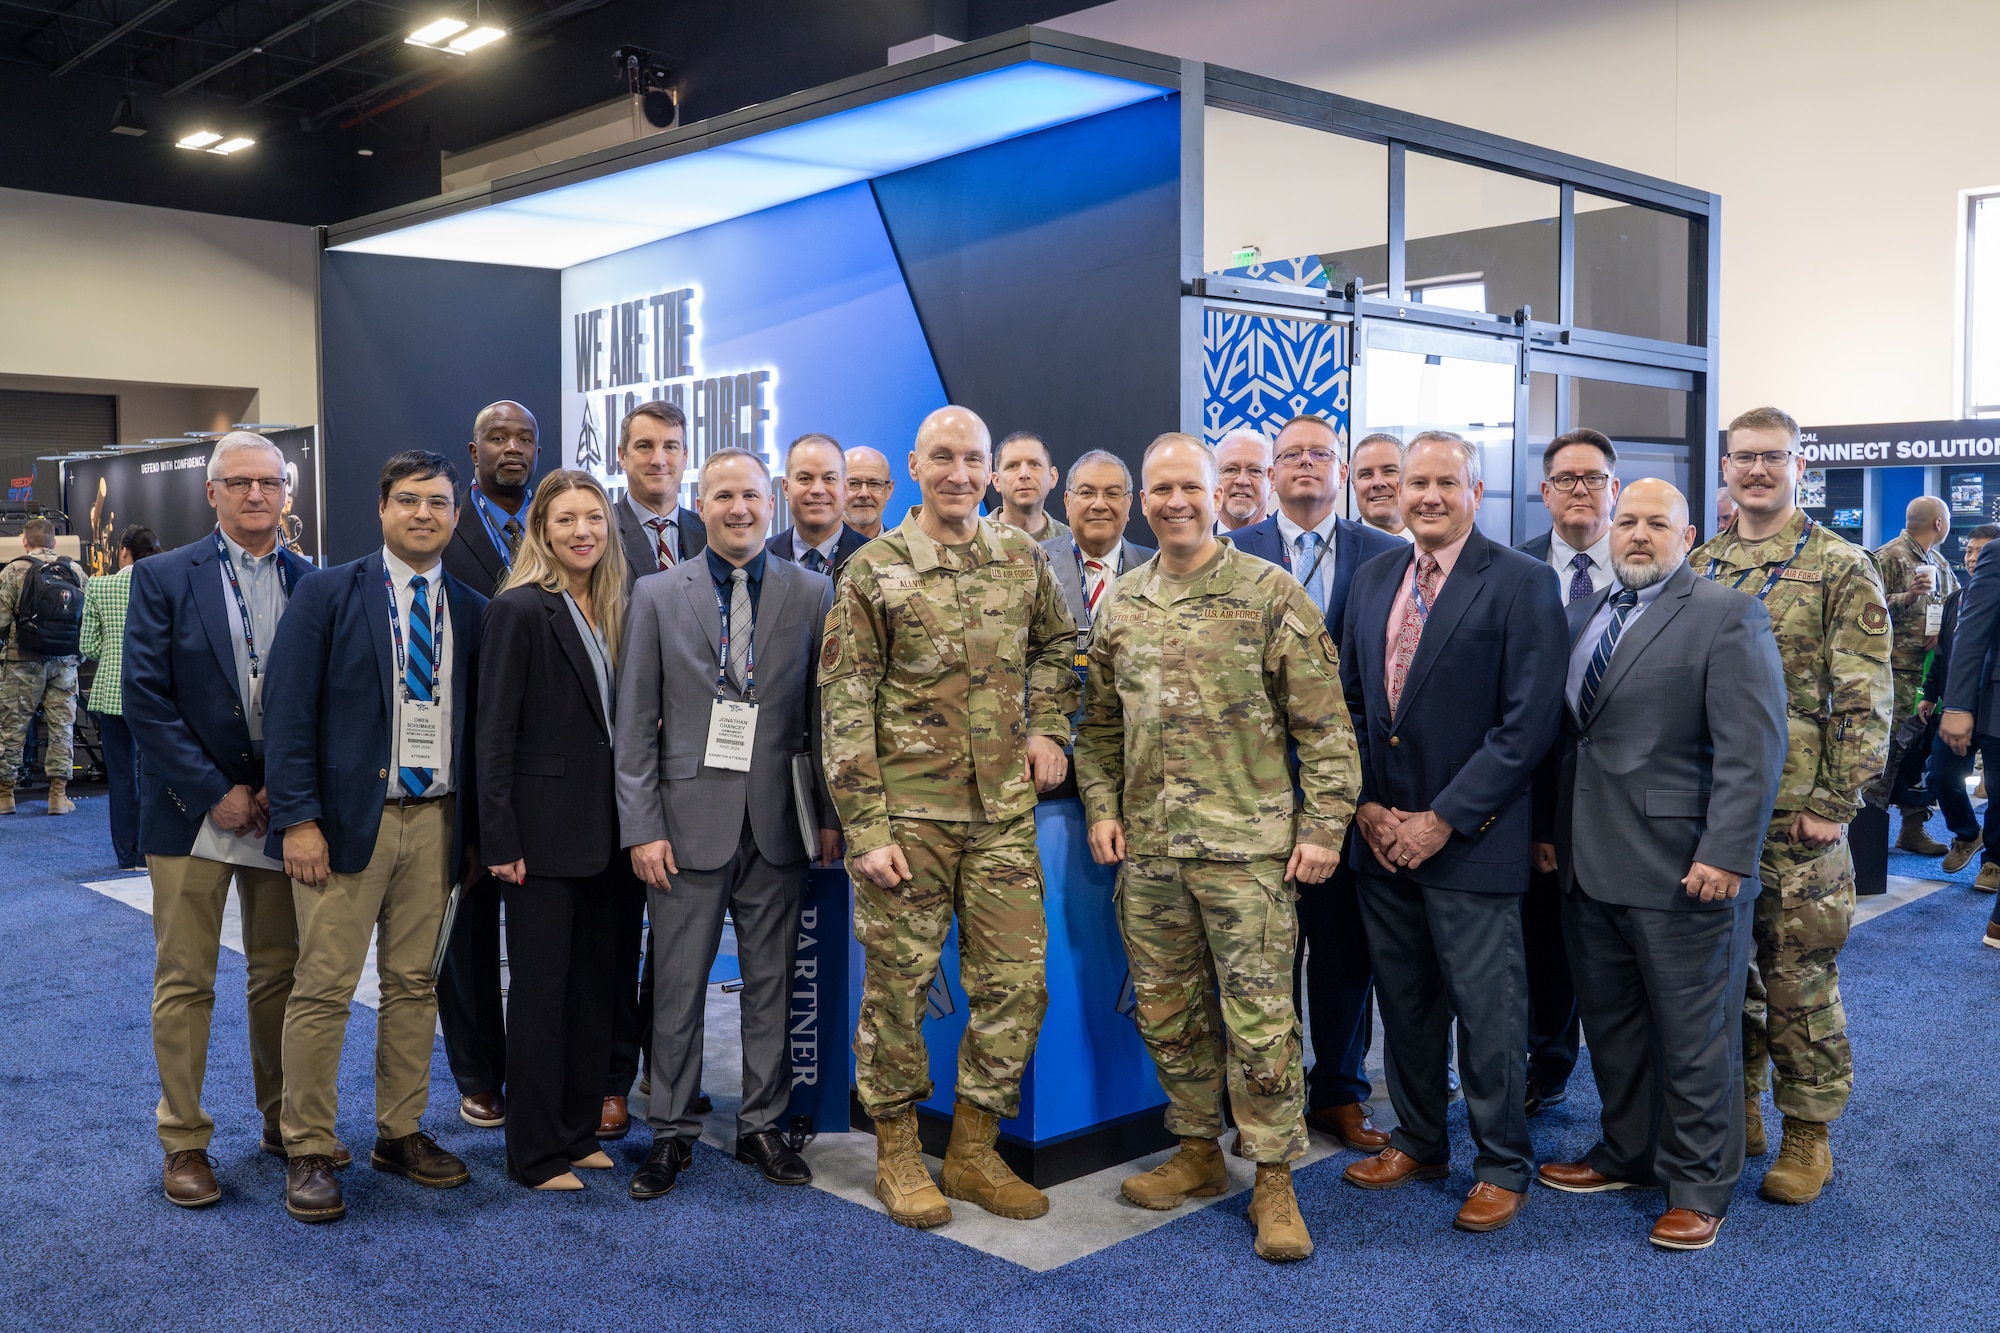 Disruptive Futures Division hosted a boost at AFA in Colorado, Feb. 2024. Visitors included Frank Kendall is the 26th Secretary of the Air Force and Gen. David W. Allvin is the Chief of Staff of the Air Force. (Courtesy photo).